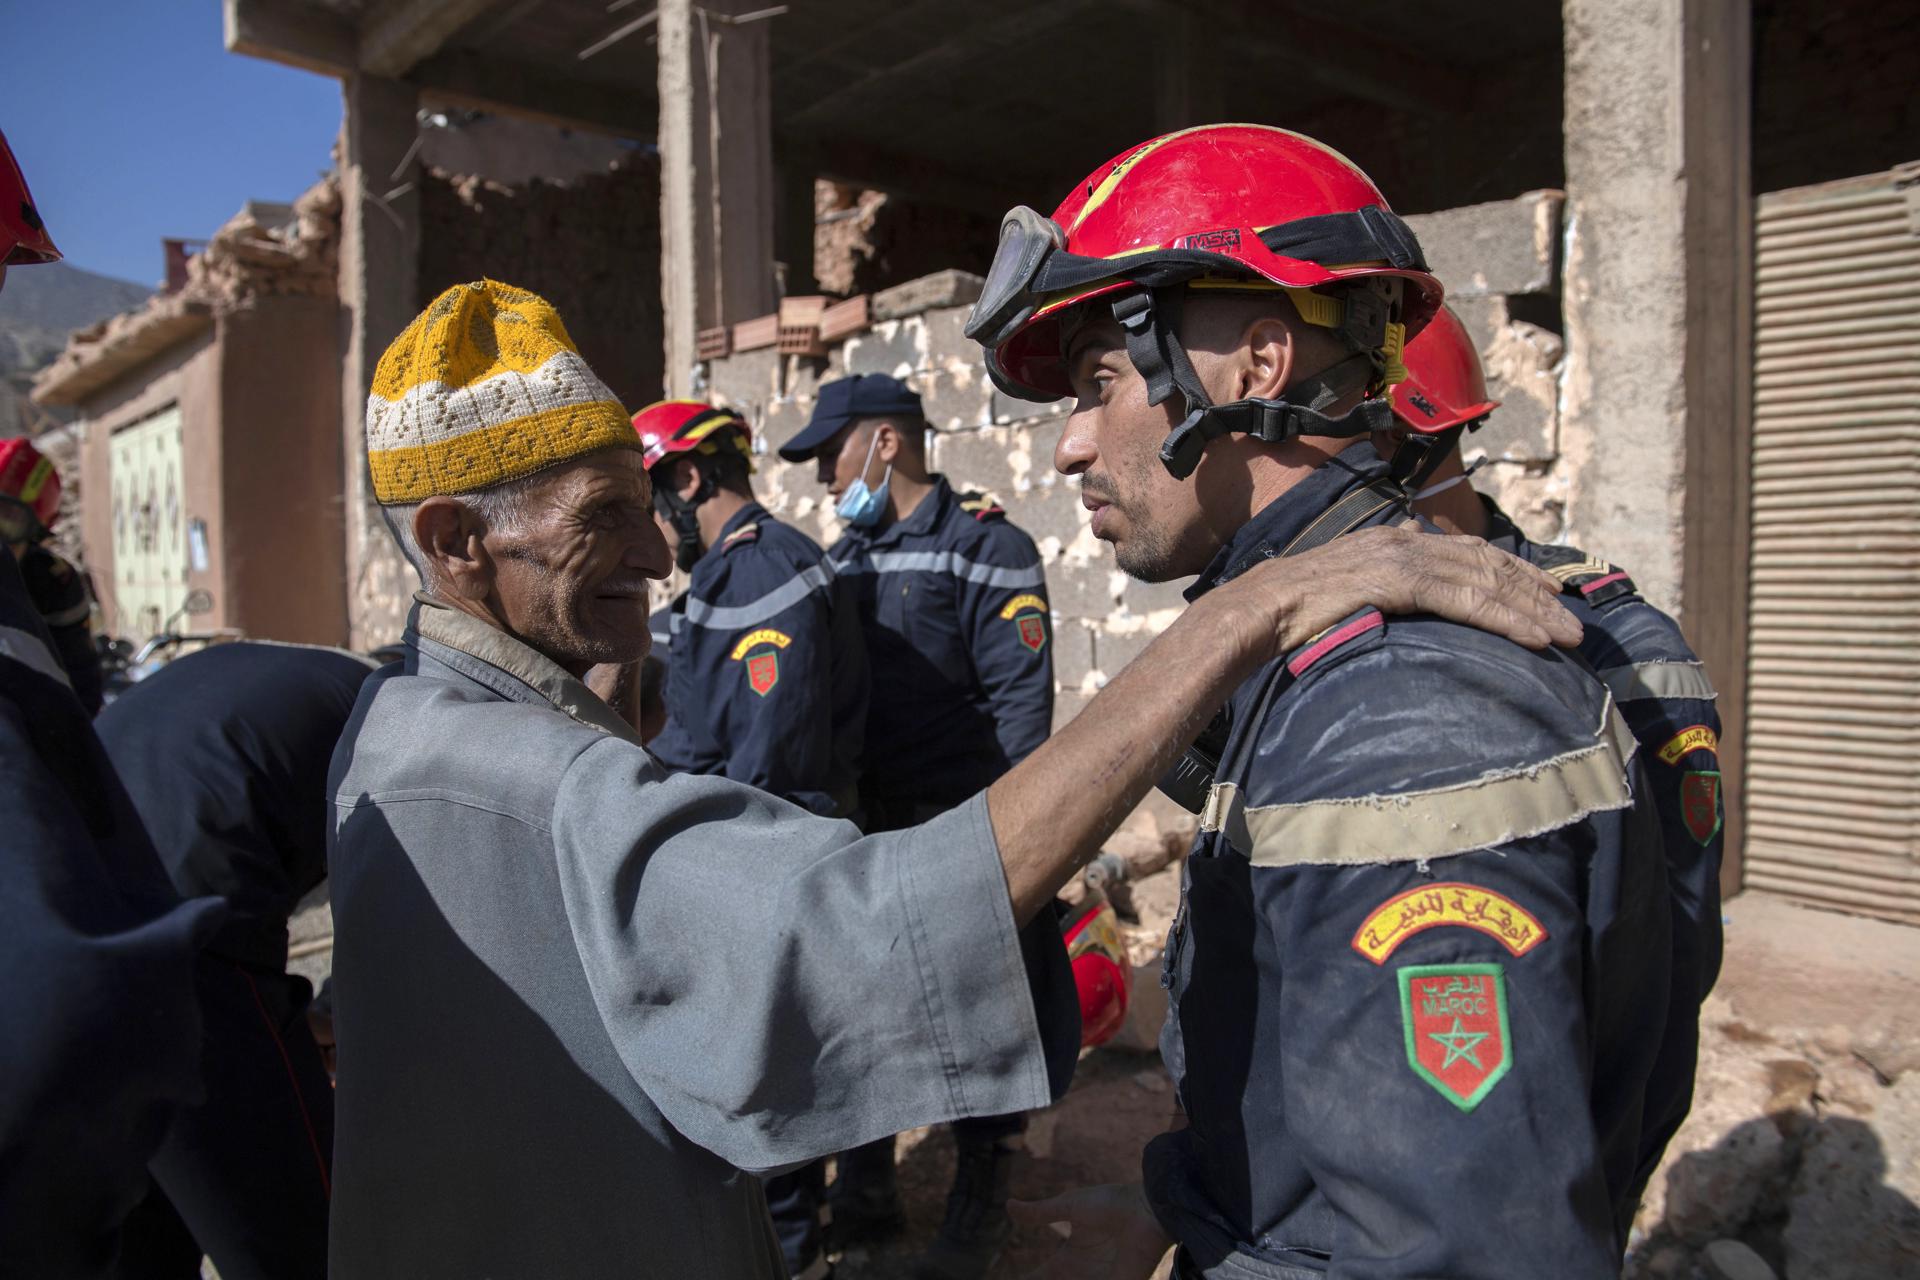 A man speaks with a member of the civil protection team as they prepare to recover bodies of victims from a collapsed building, Imi Ntala, Amizmiz, south of Marrakesh, Morocco, 13 September 2023. EFE/EPA/JALAL MORCHIDI